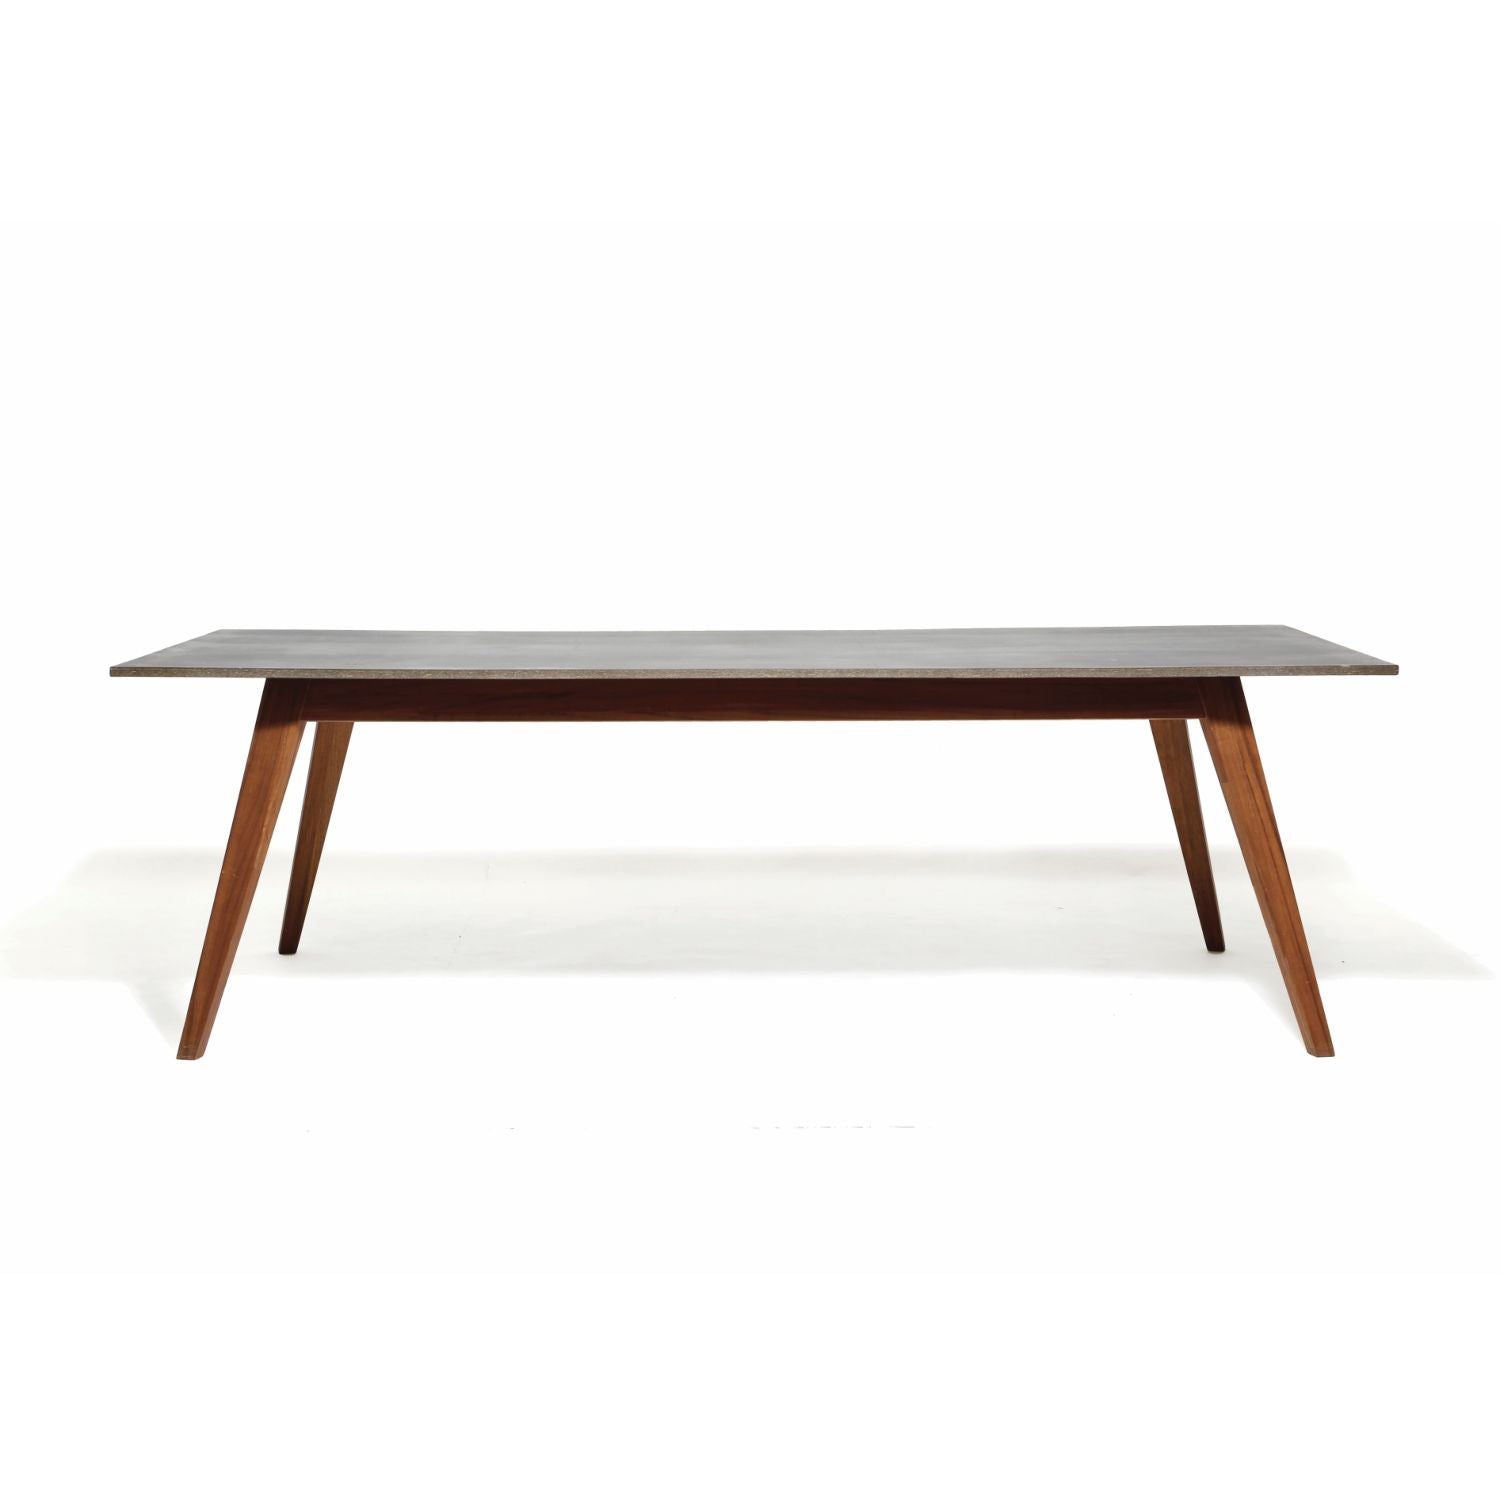 Martina | 10 Seat Concrete Dining Table